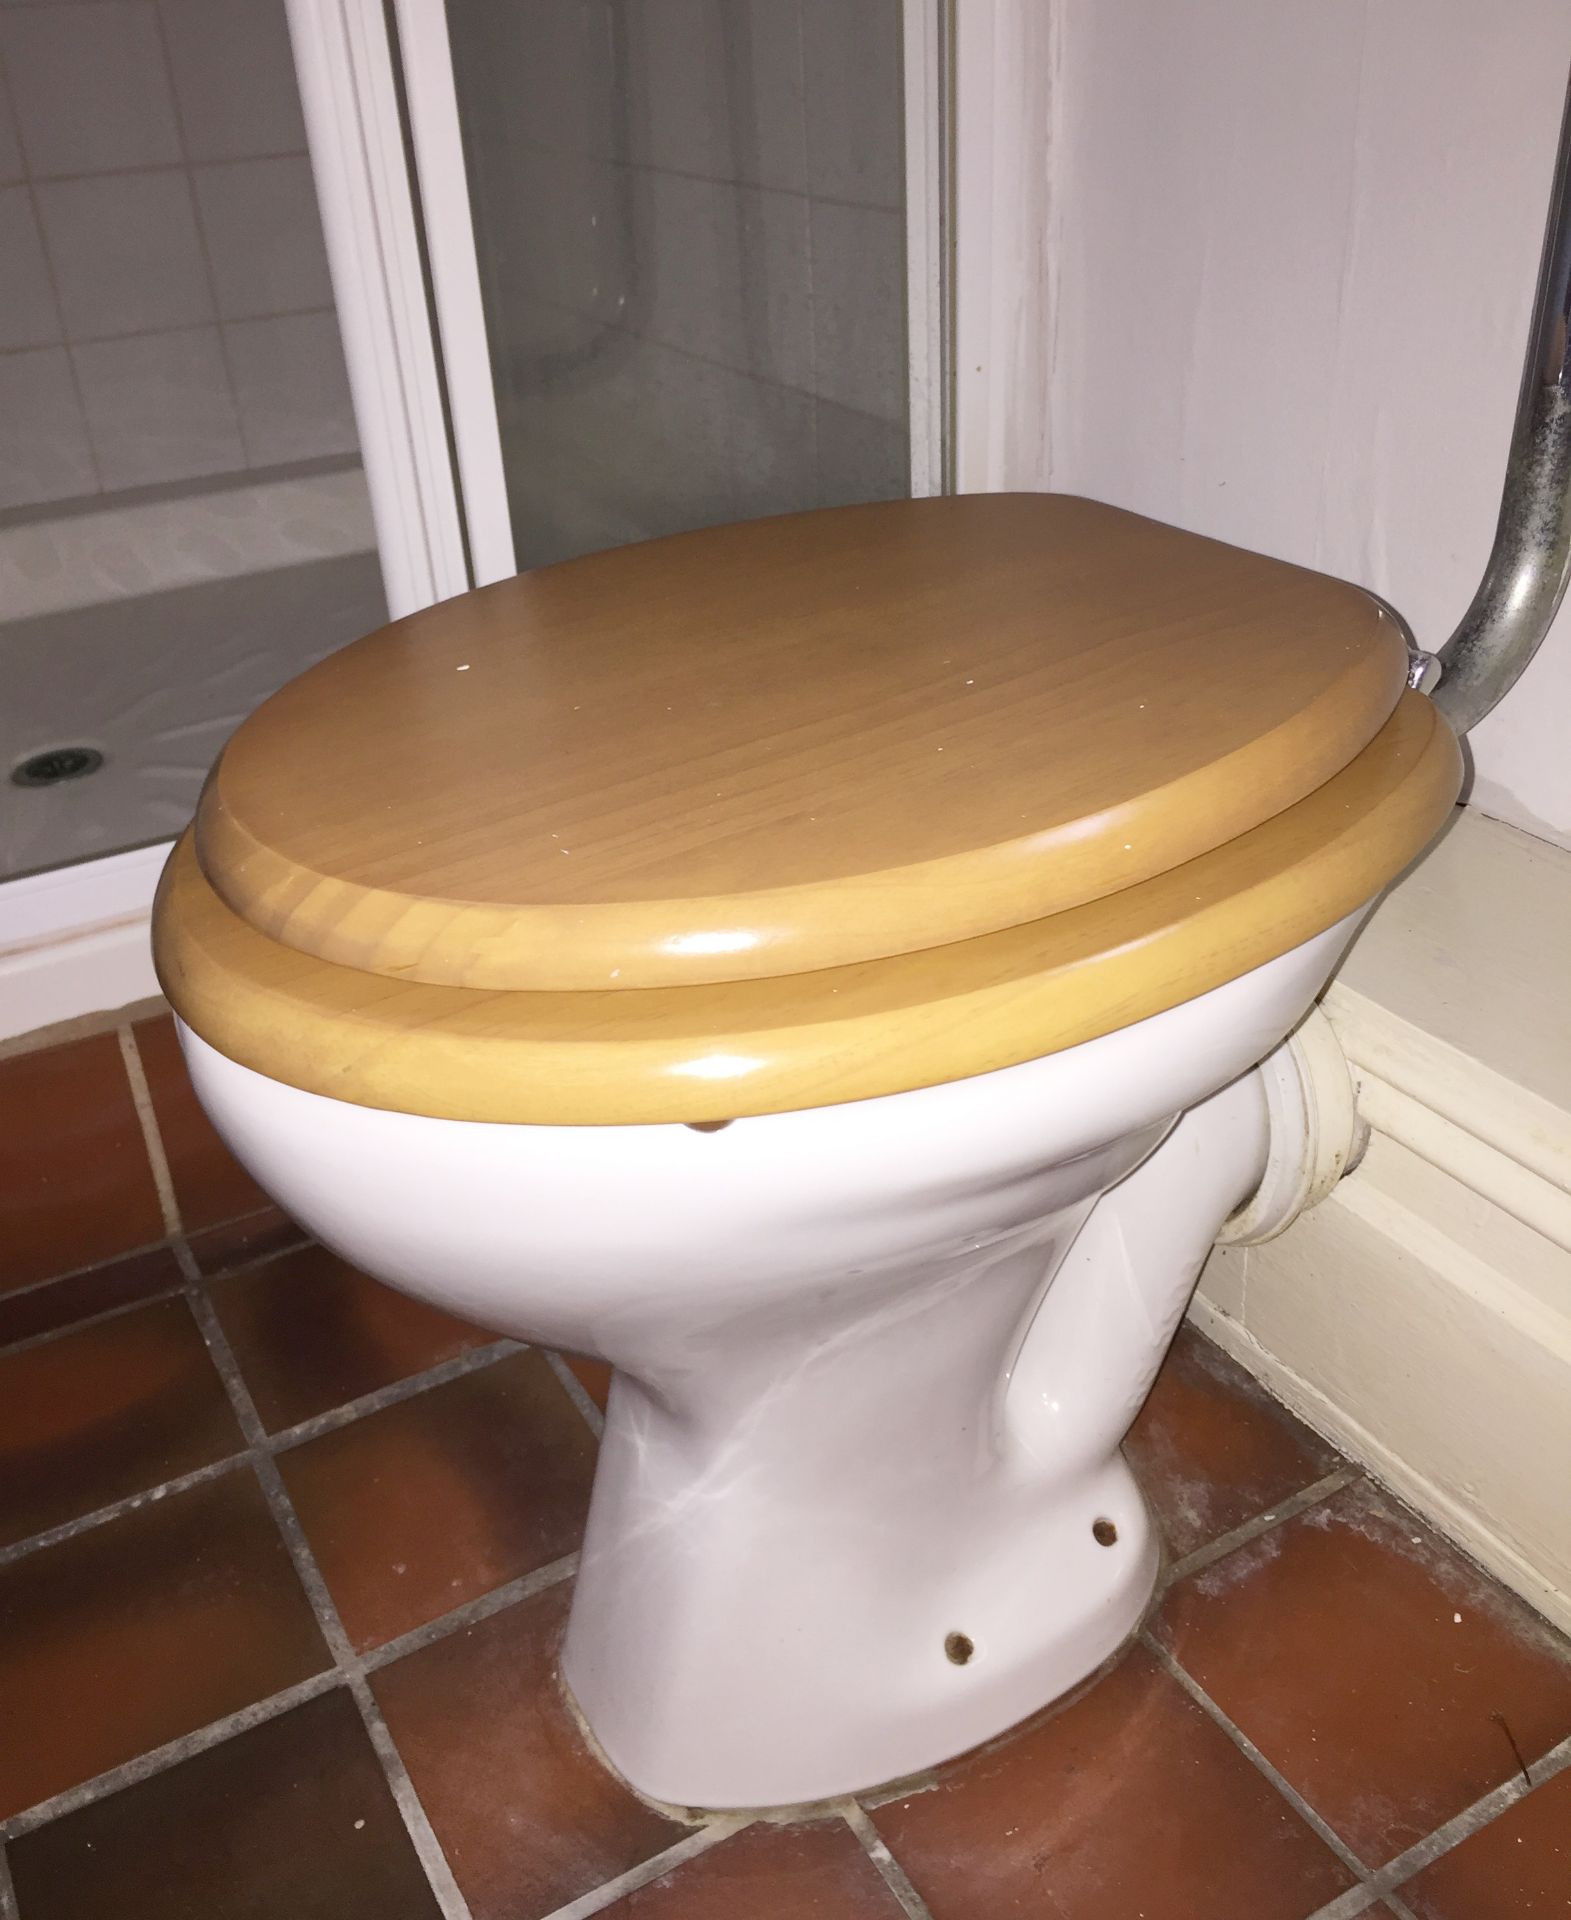 1 x Victorian-Style High Level Cistern W/C Approx 2 Metres From Floor - Preowned In Good Condition - - Image 2 of 7